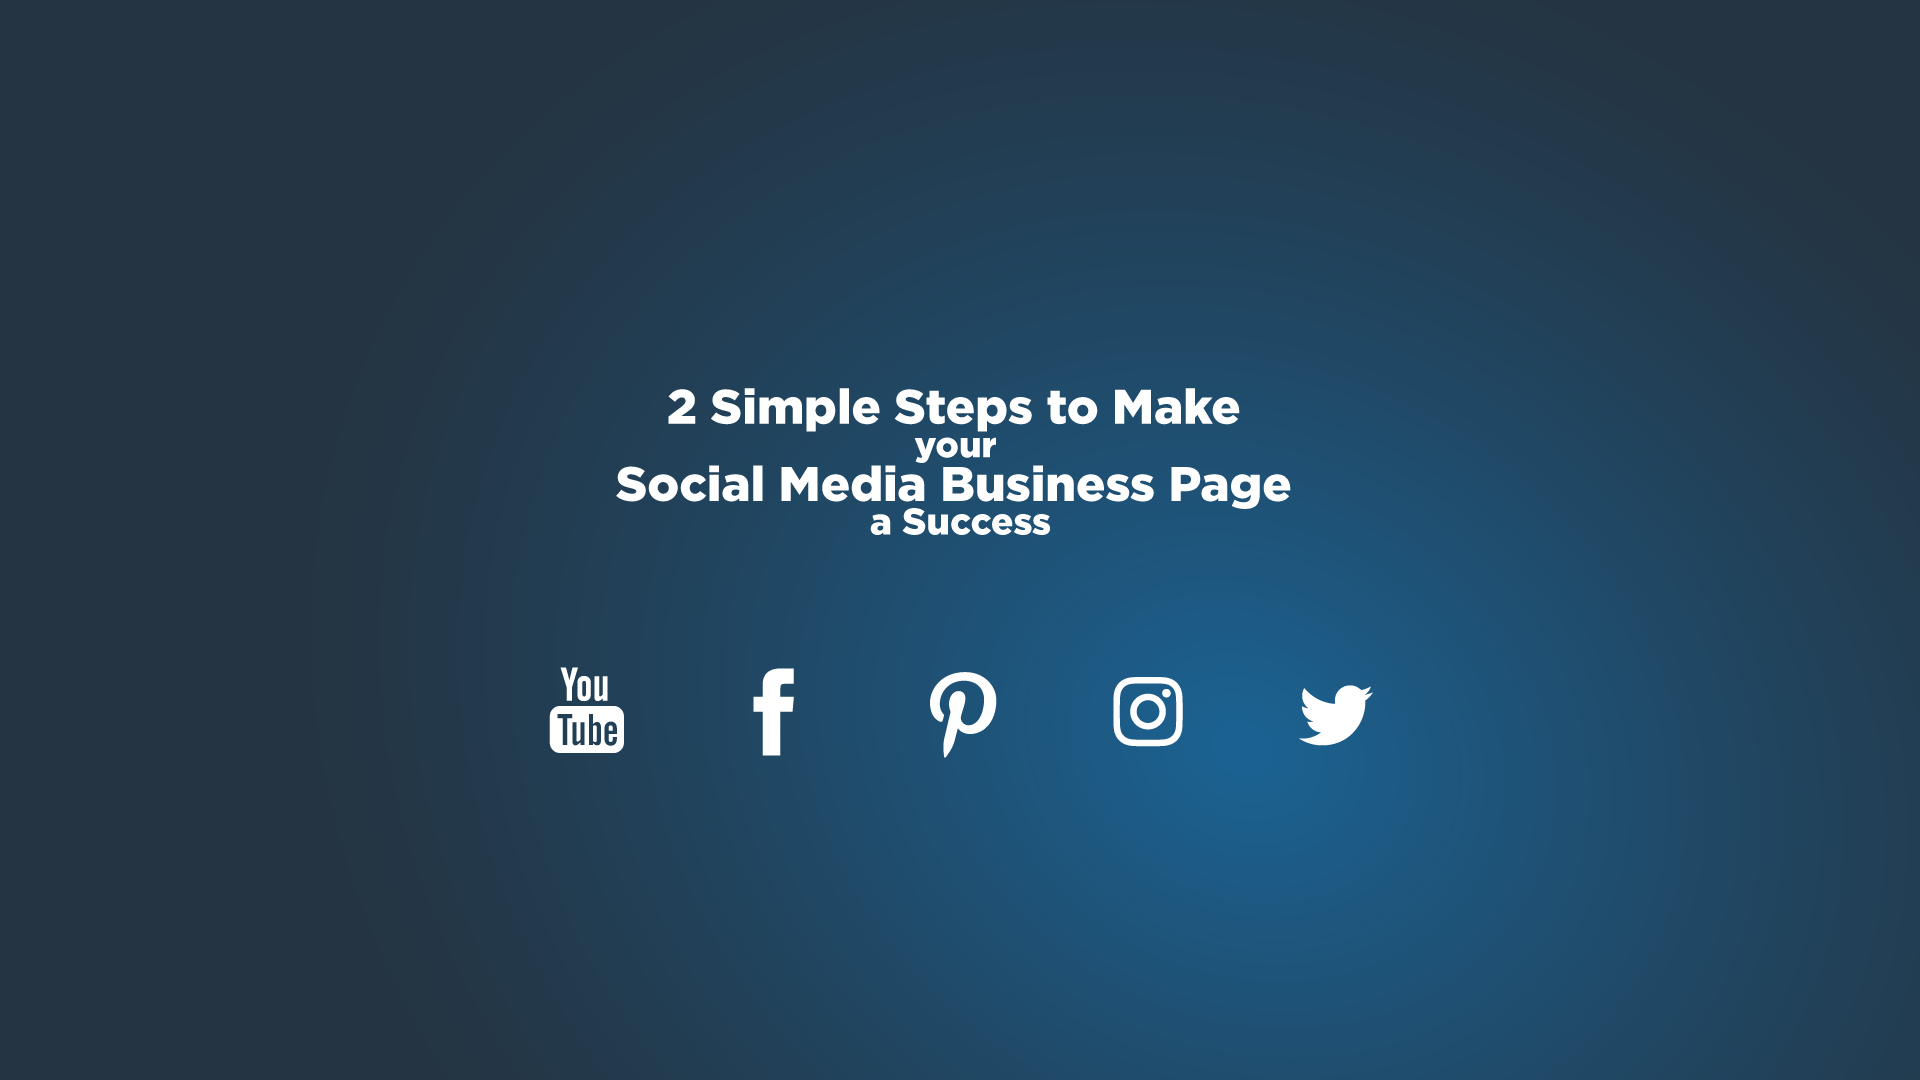 2 simple steps to make your social media business page a success